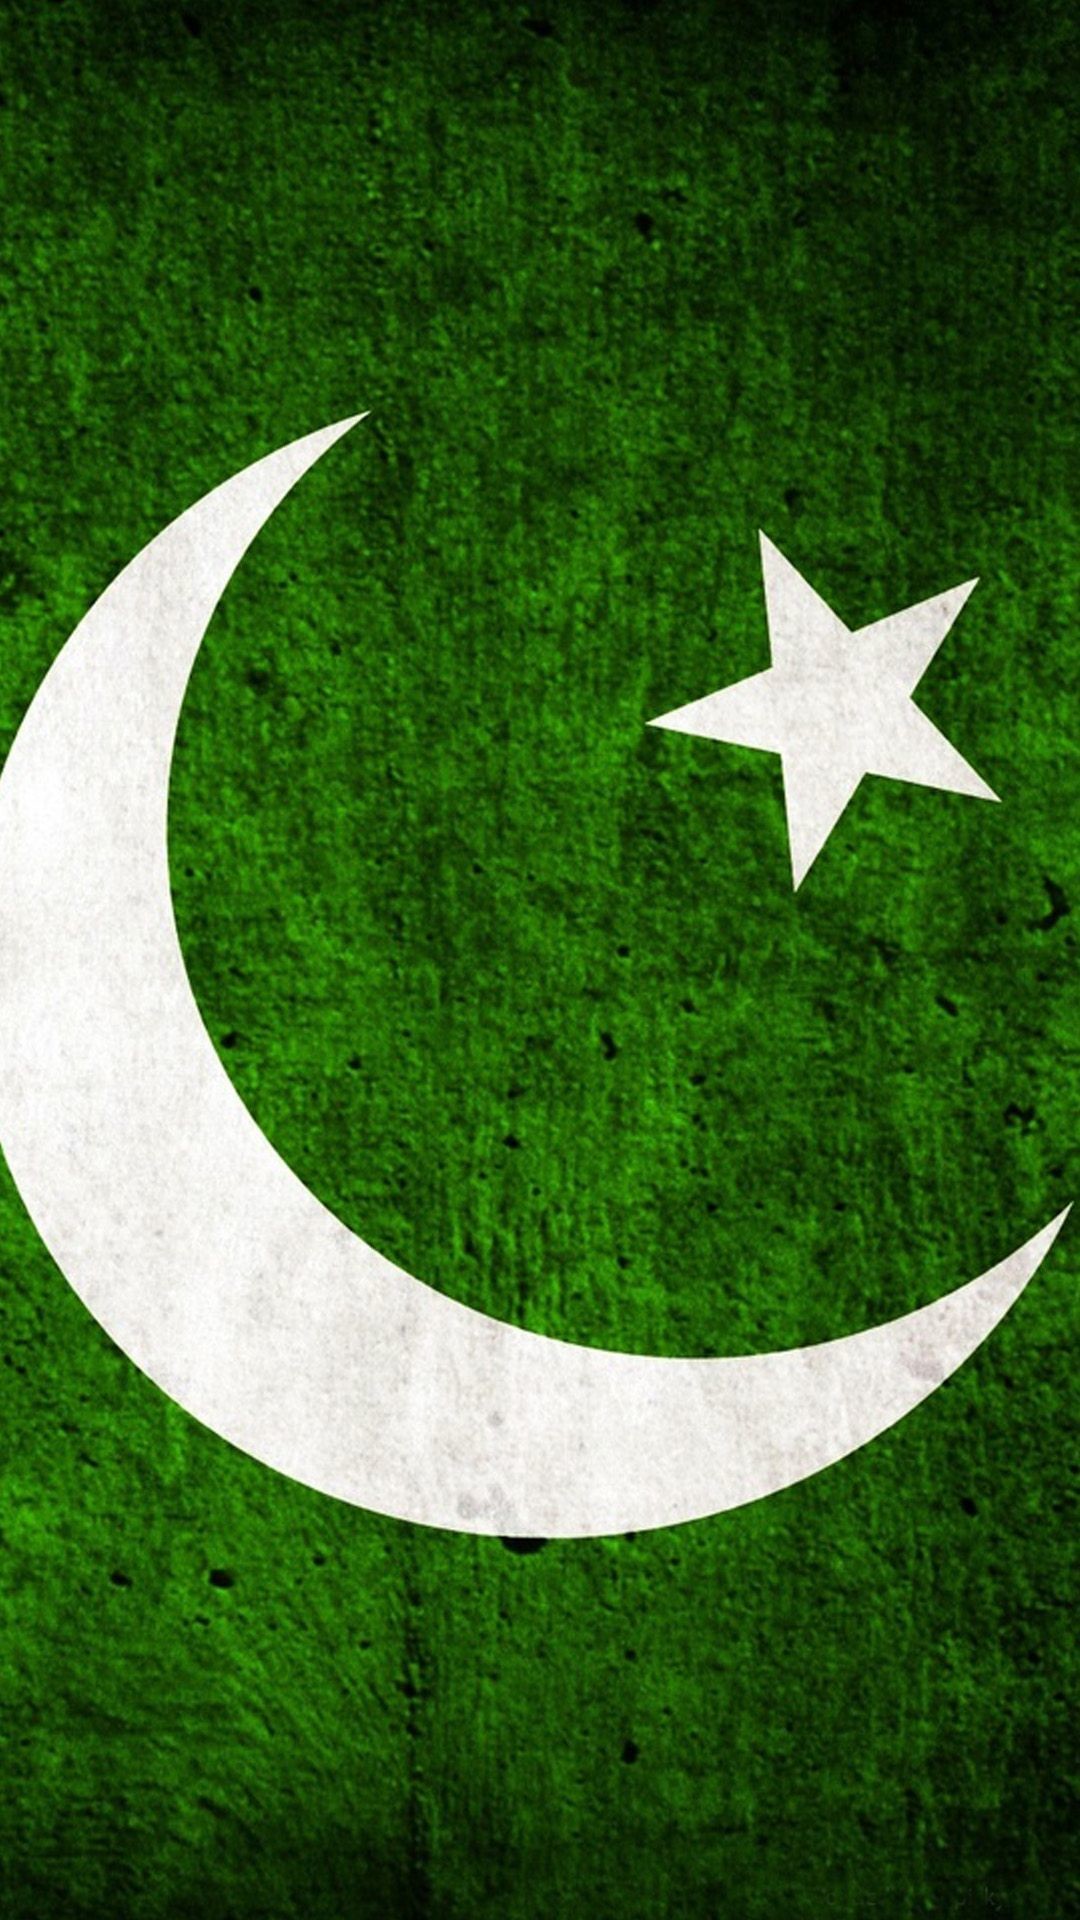 Pakistan Flag Wallpapers HD 2018 (77+ images)